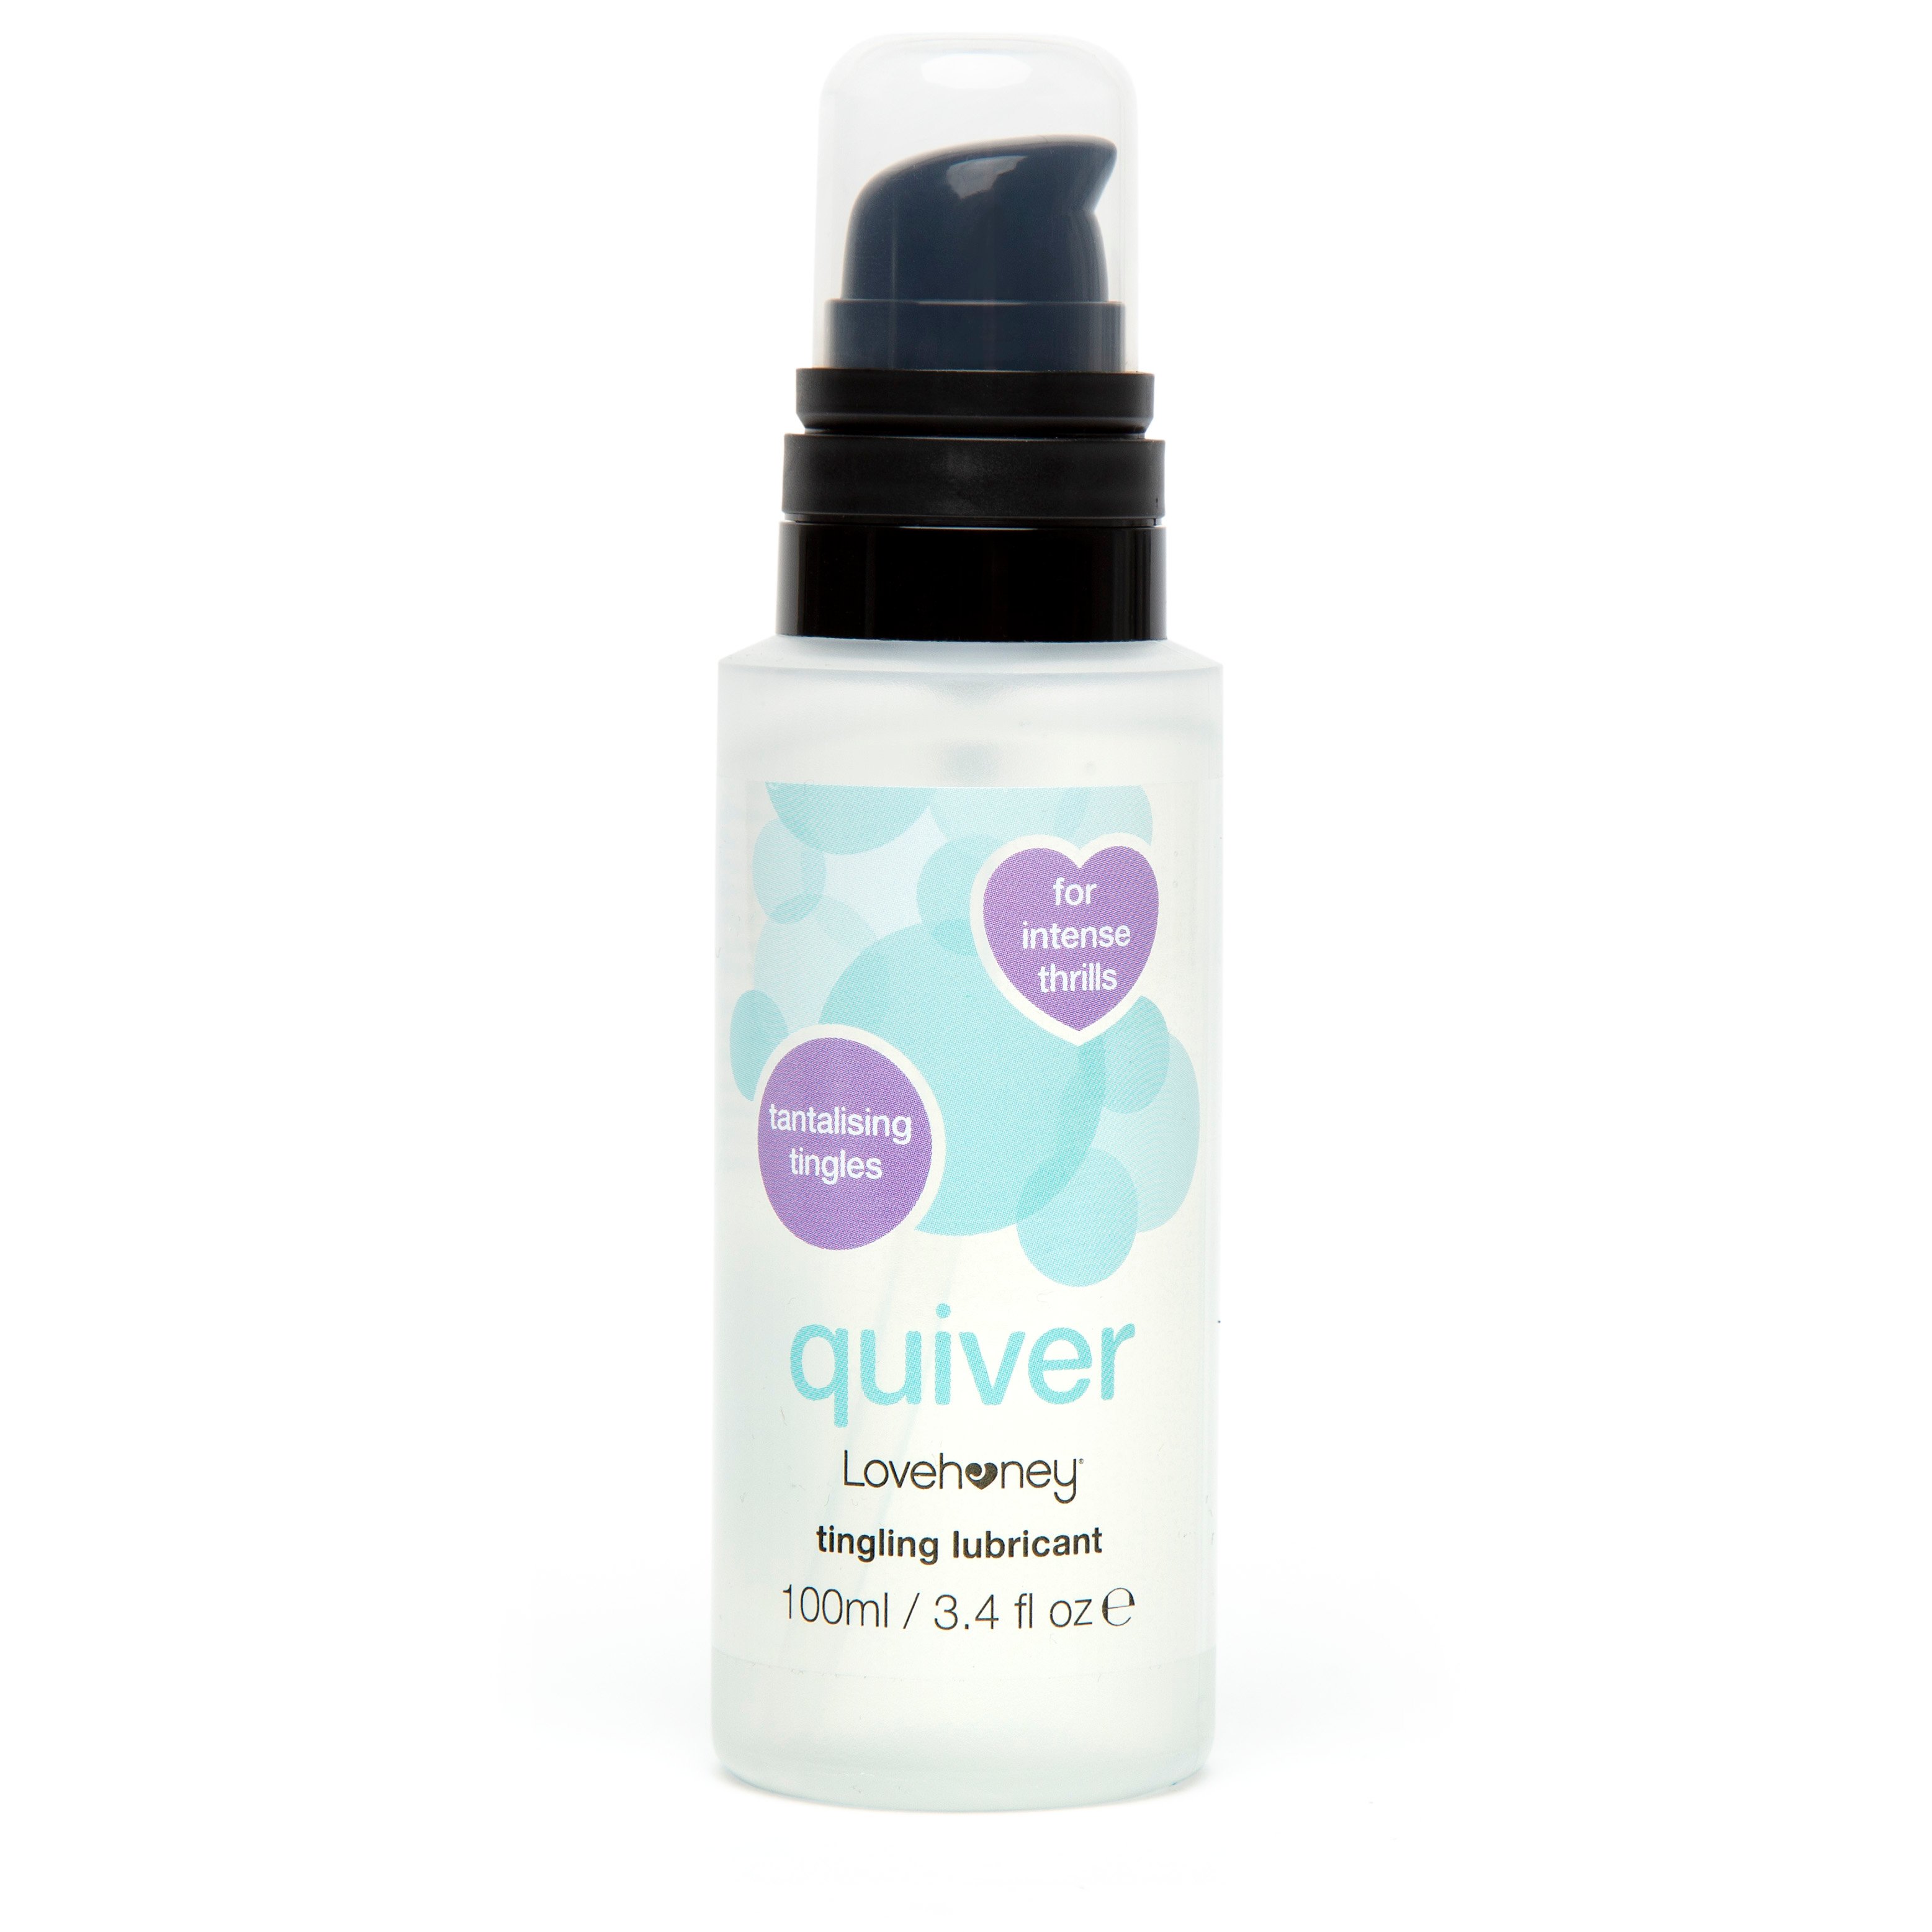 Lovehoney Quiver Tingling Lubricant - 100ml